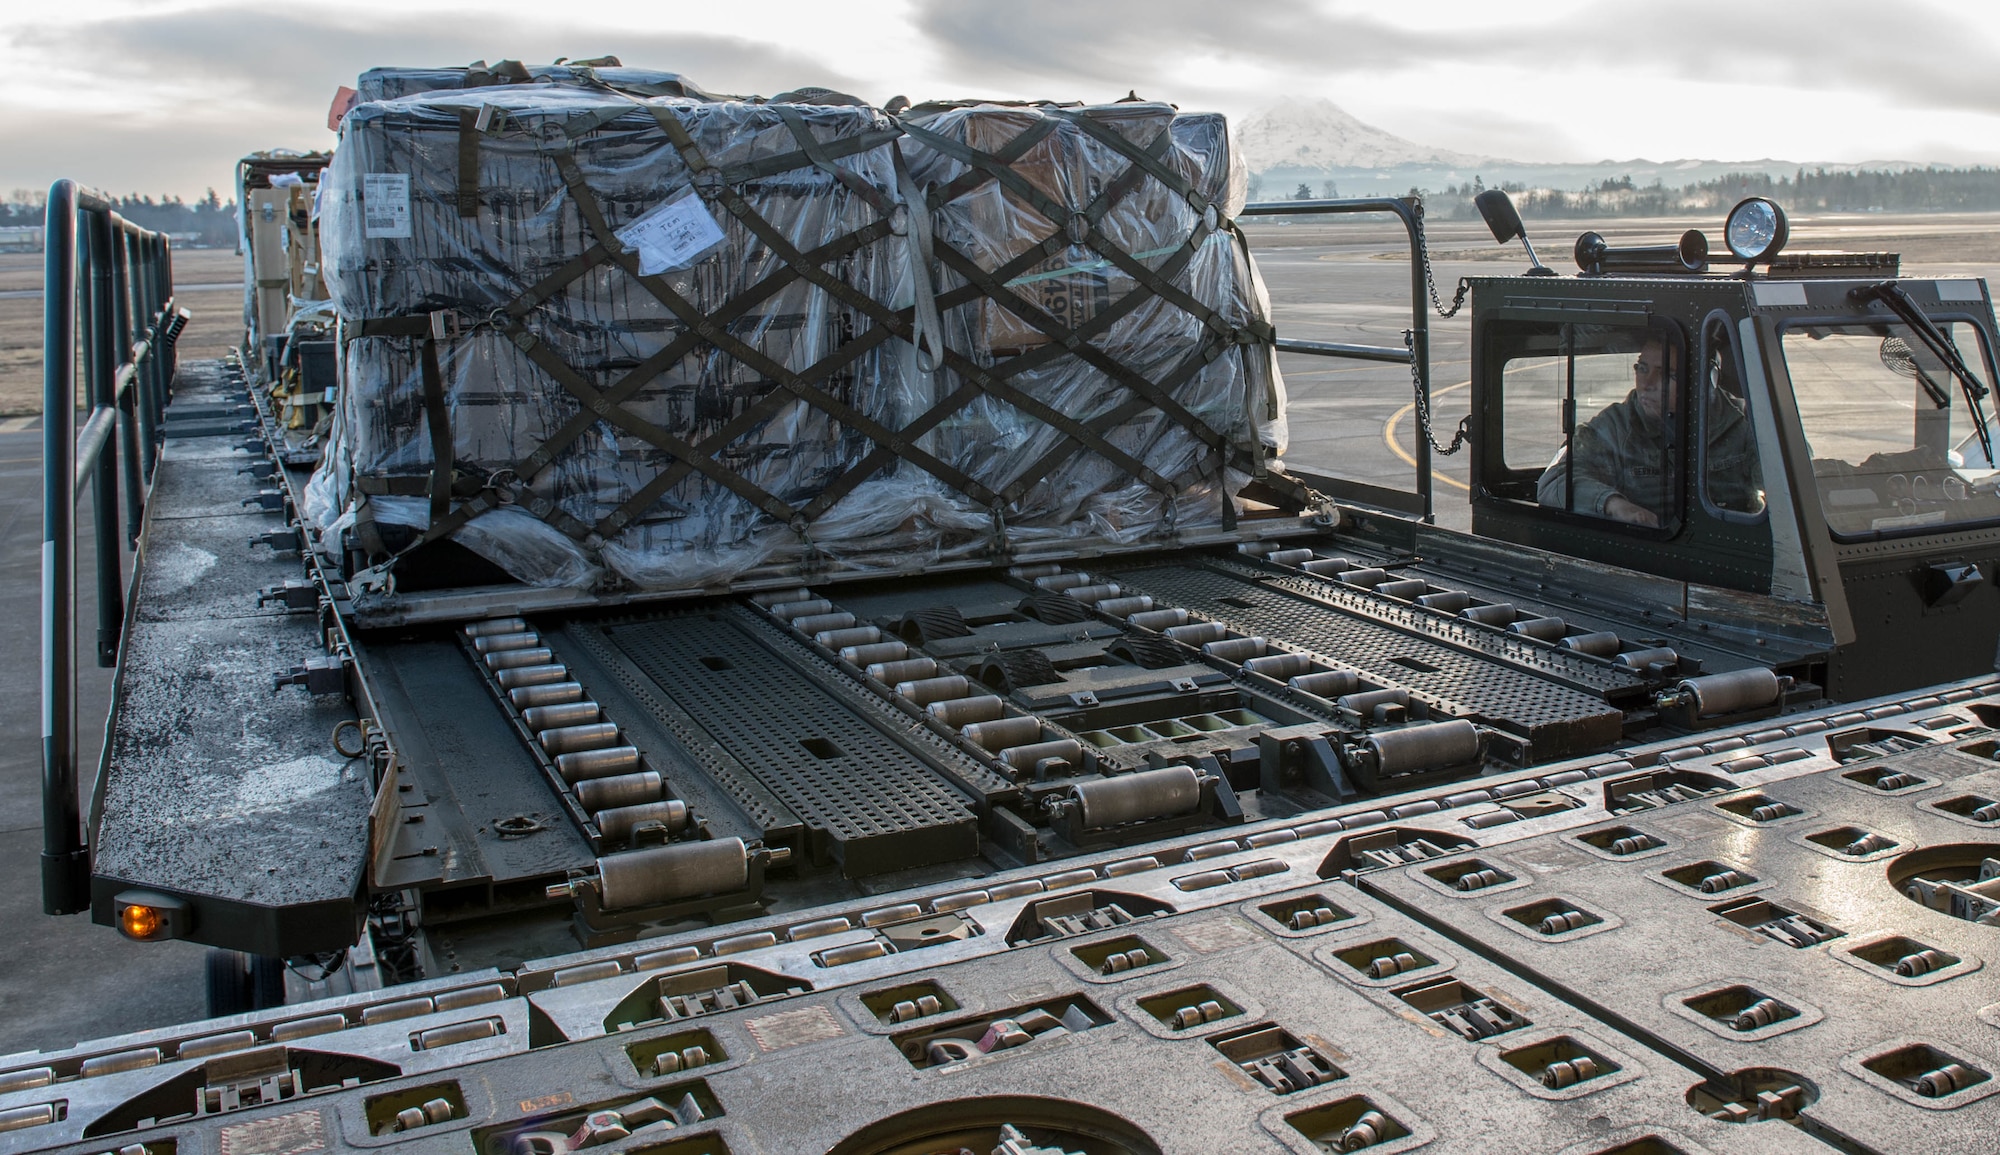 Staff Sgt. Jorge Hernandez, 821st Contingency Response Squadron, uses a K-loader to load cargo onto a KC-10 Extender aircraft from Travis Air Force Base, Calif., Jan. 23, 2017, at Joint Base Lewis-McChord, Washington. Airmen from the 821st Contingency Response Group, exercised their capability to support humanitarian efforts during exercise Dragon Breath at JBLM and Fairchild Air Force Base. (U.S. Air Force photo by Staff Sgt. Robert Hicks)